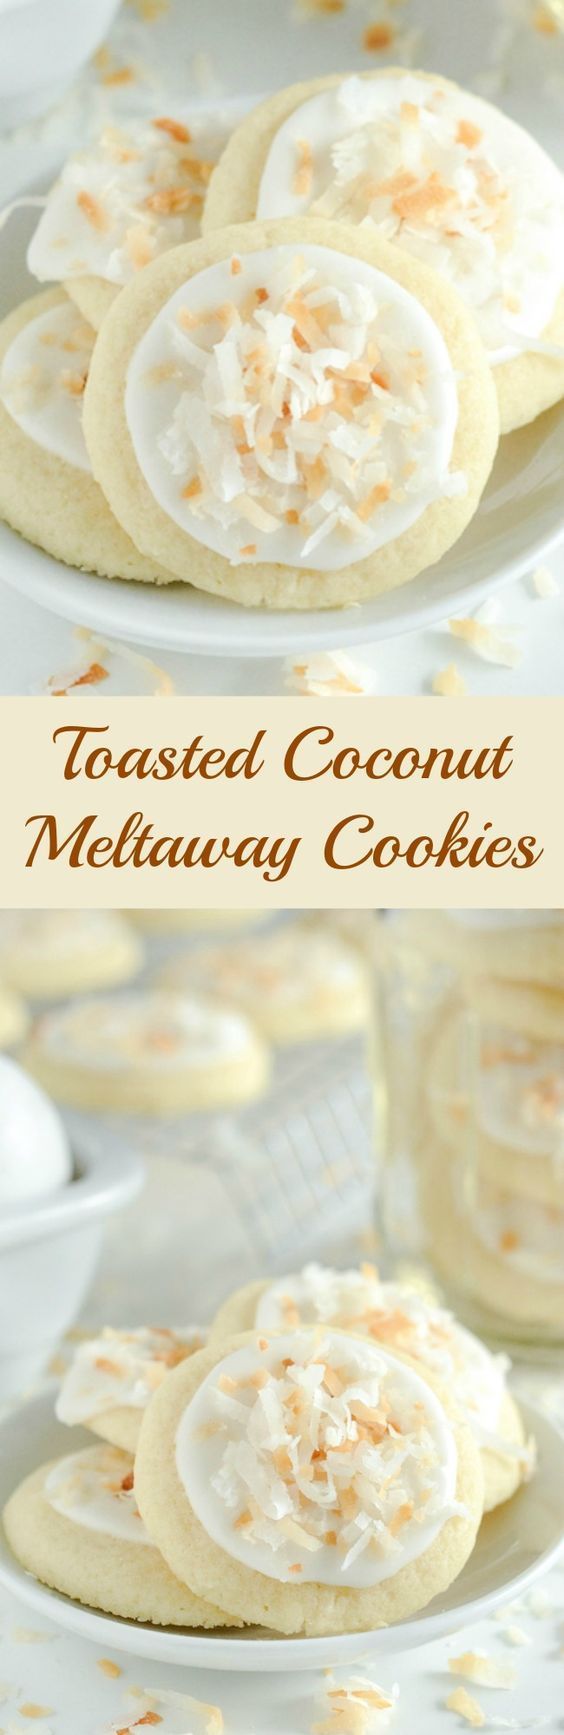 Coconut Meltaway Cookies – a soft coconut shortbread cookie topped with royal icing and toasted coconu